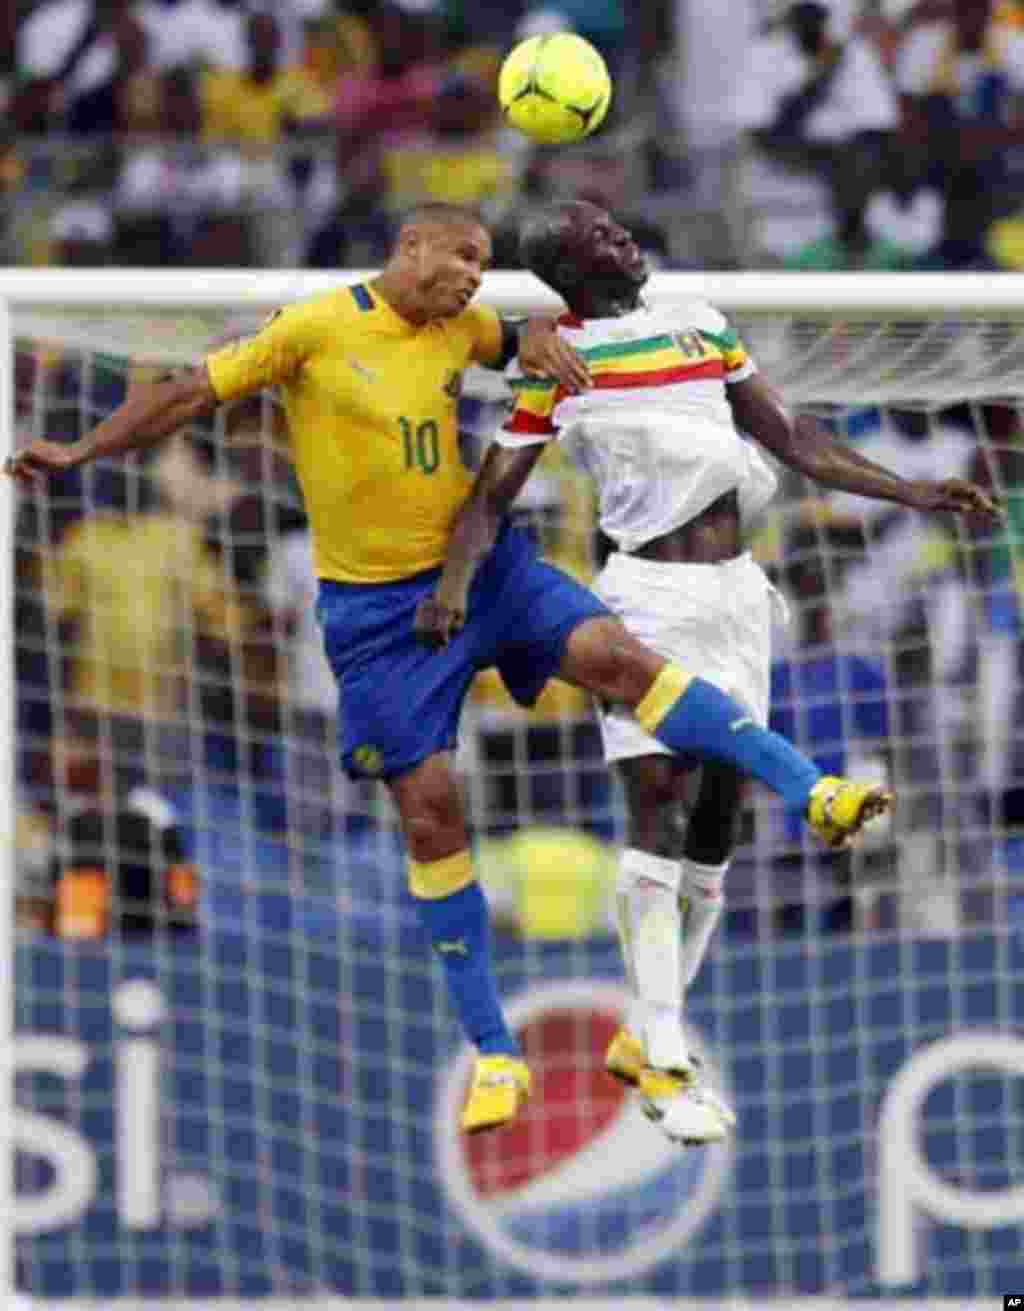 Gabon's captain Daniel Cousin (L) jumps for the ball with Mali's Drissa Diakite during their African Cup of Nations quarter-final soccer match against Mali at the Stade De L'Amitie Stadium in Gabon's capital Libreville February 5, 2012.